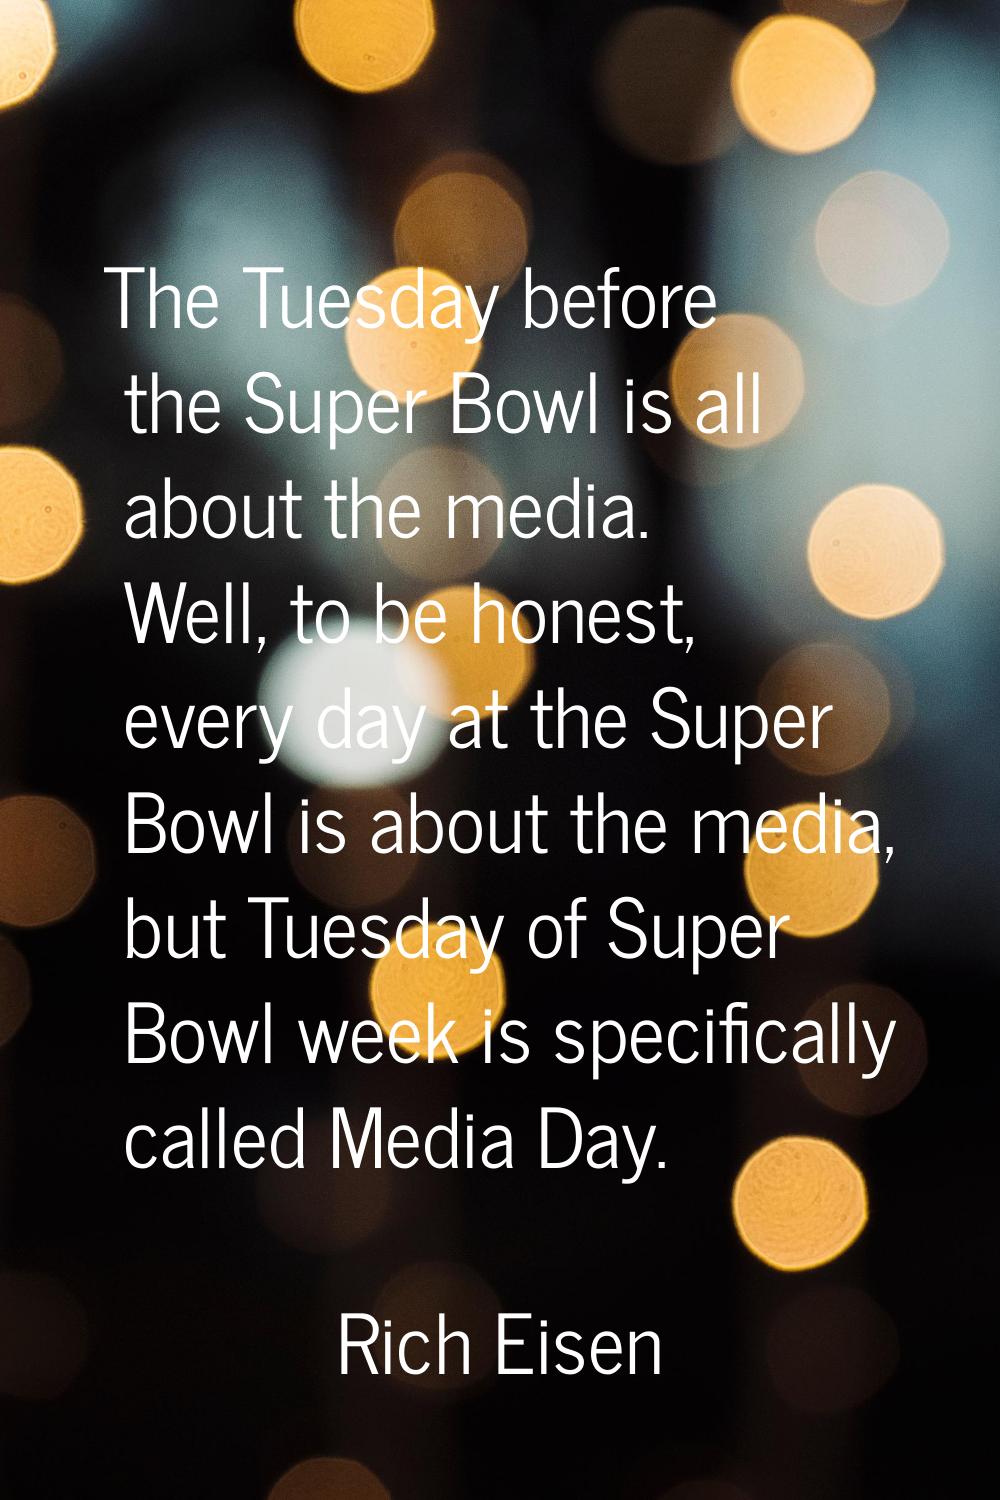 The Tuesday before the Super Bowl is all about the media. Well, to be honest, every day at the Supe